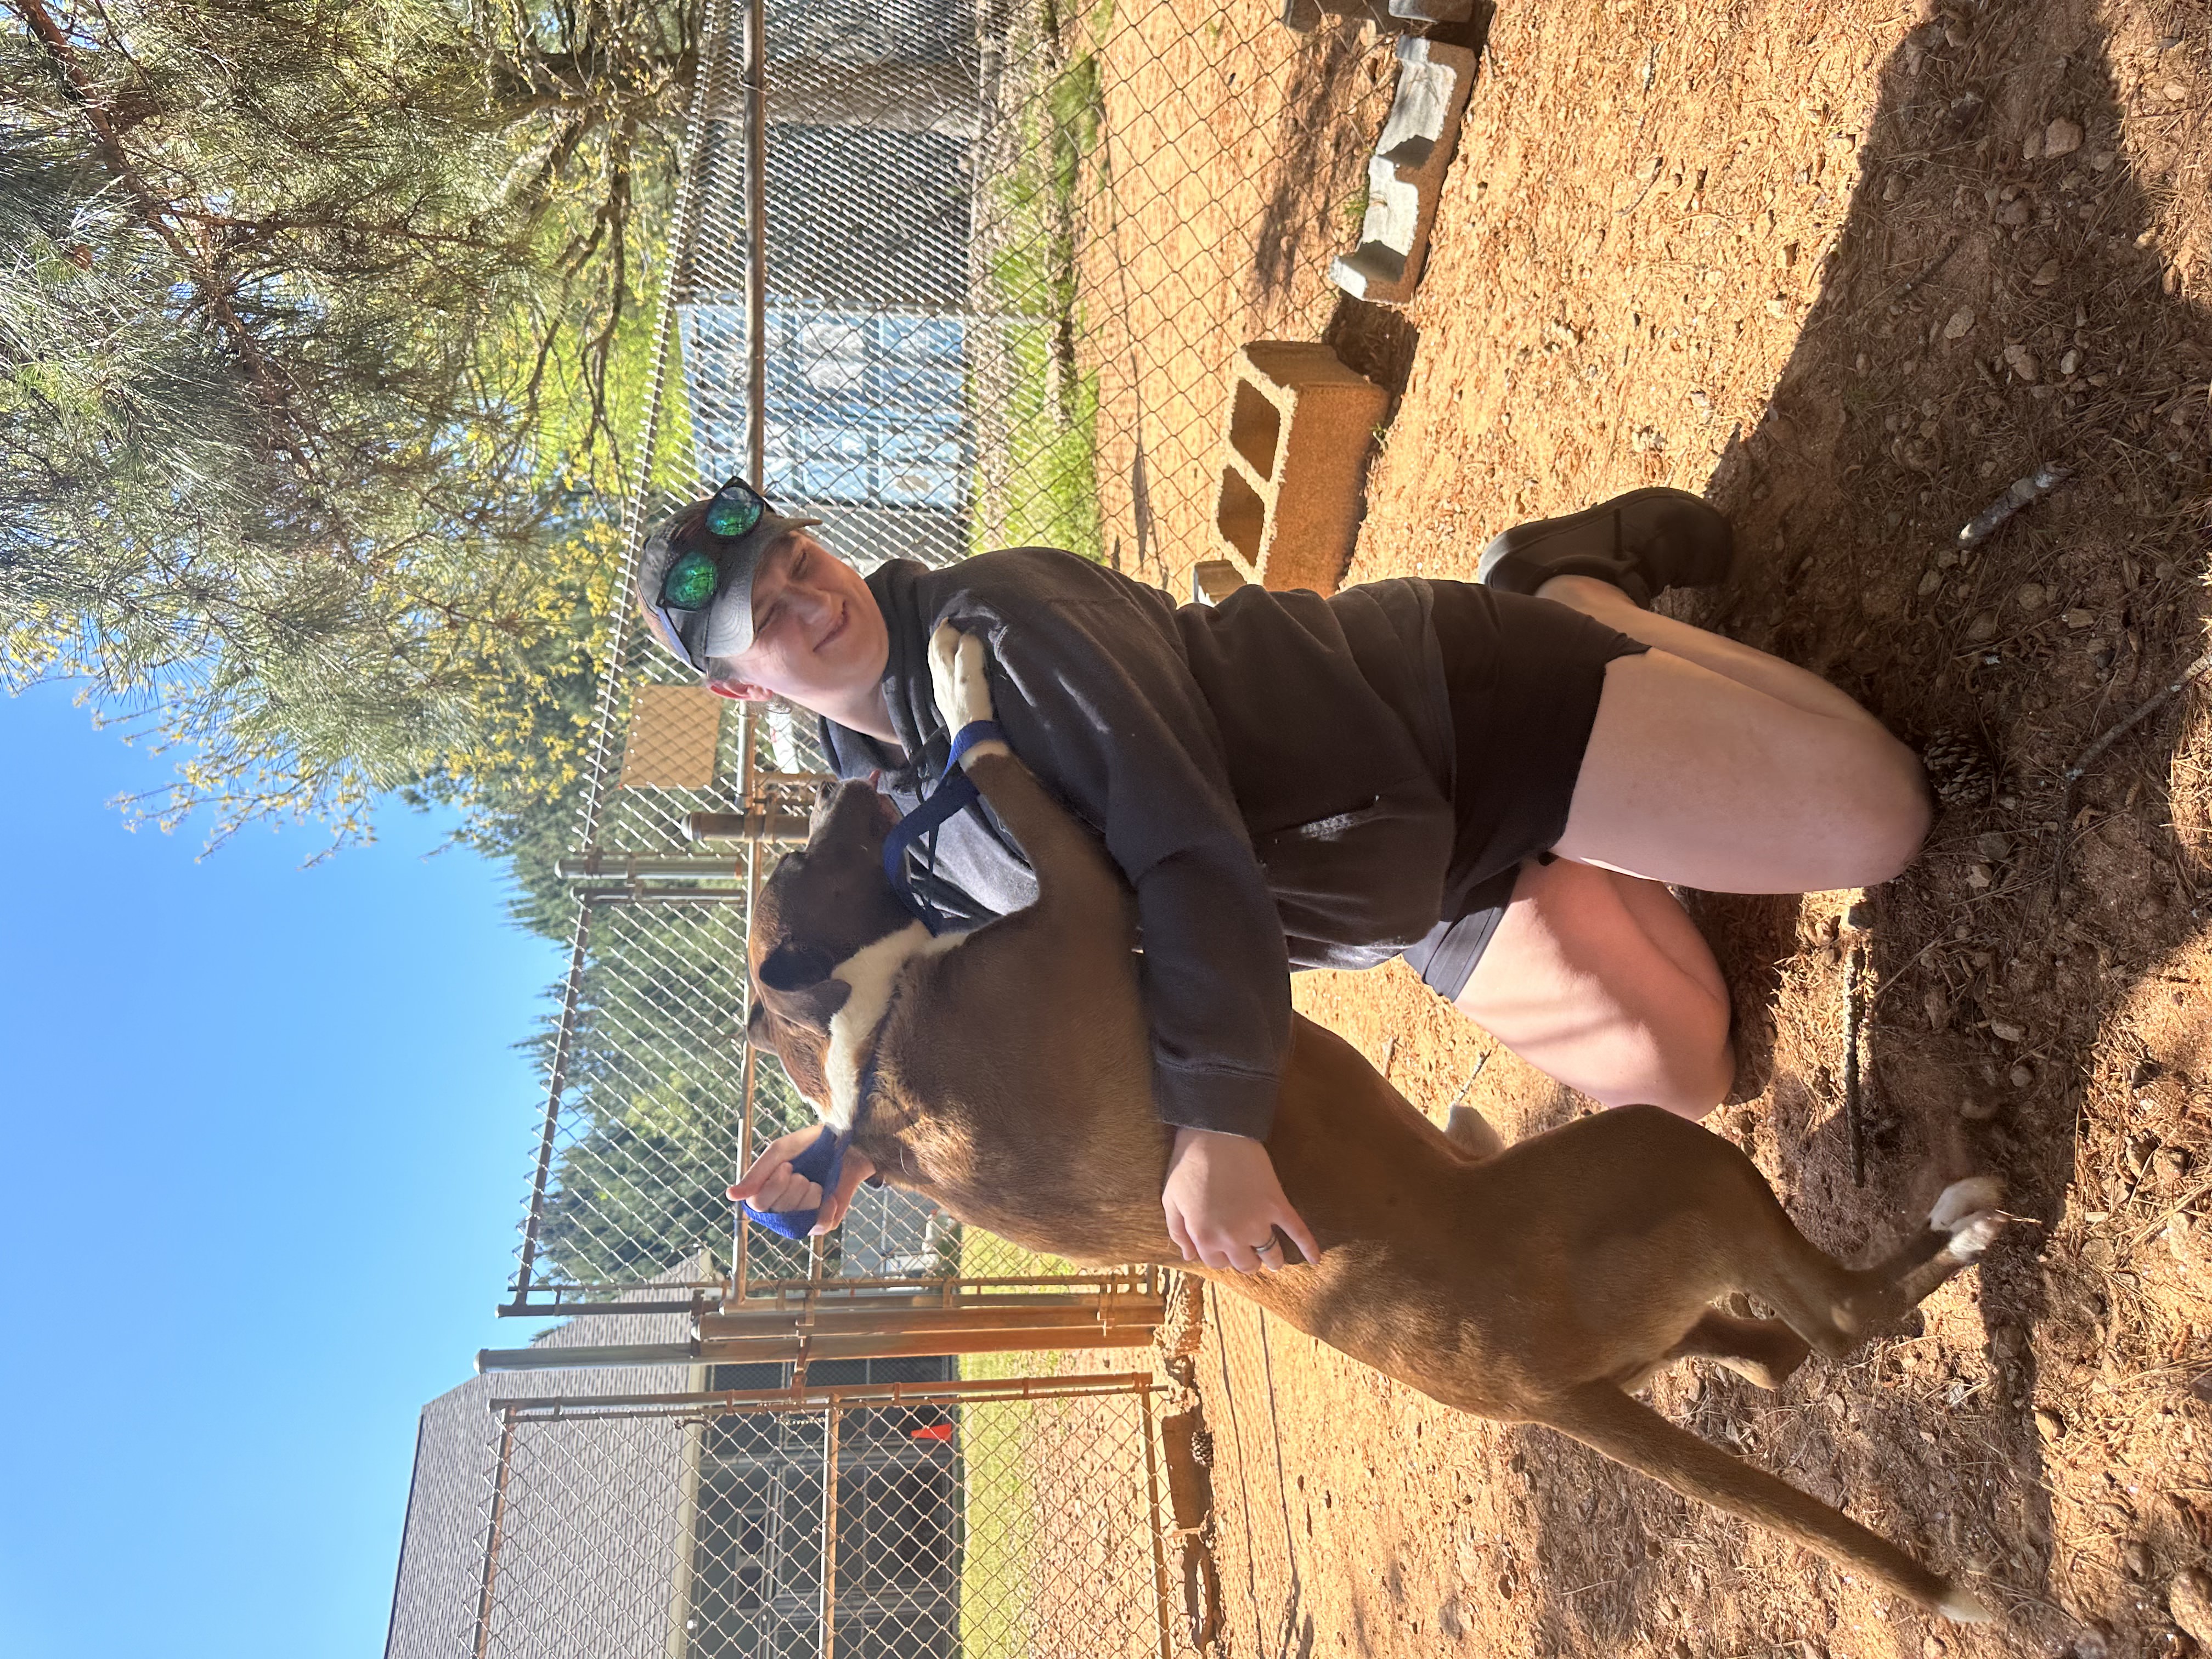 MOAS shelter manager Juli Huth plays with Jax recently at MOAS. Jax is available for adoption and sponsorship through the MOAS sponsorship program.